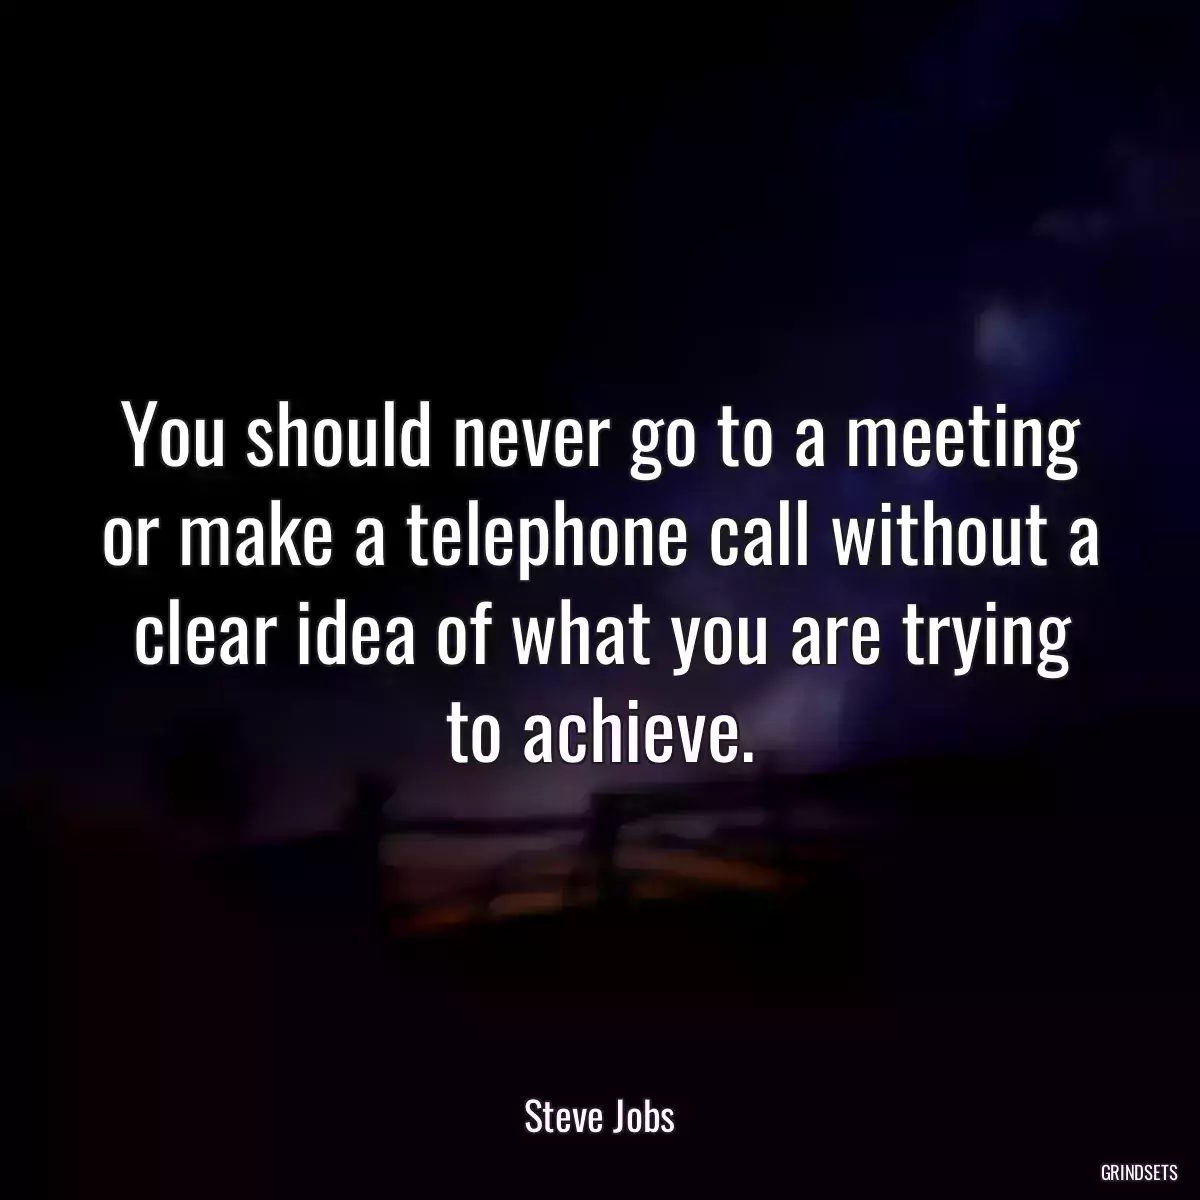 You should never go to a meeting or make a telephone call without a clear idea of what you are trying to achieve.